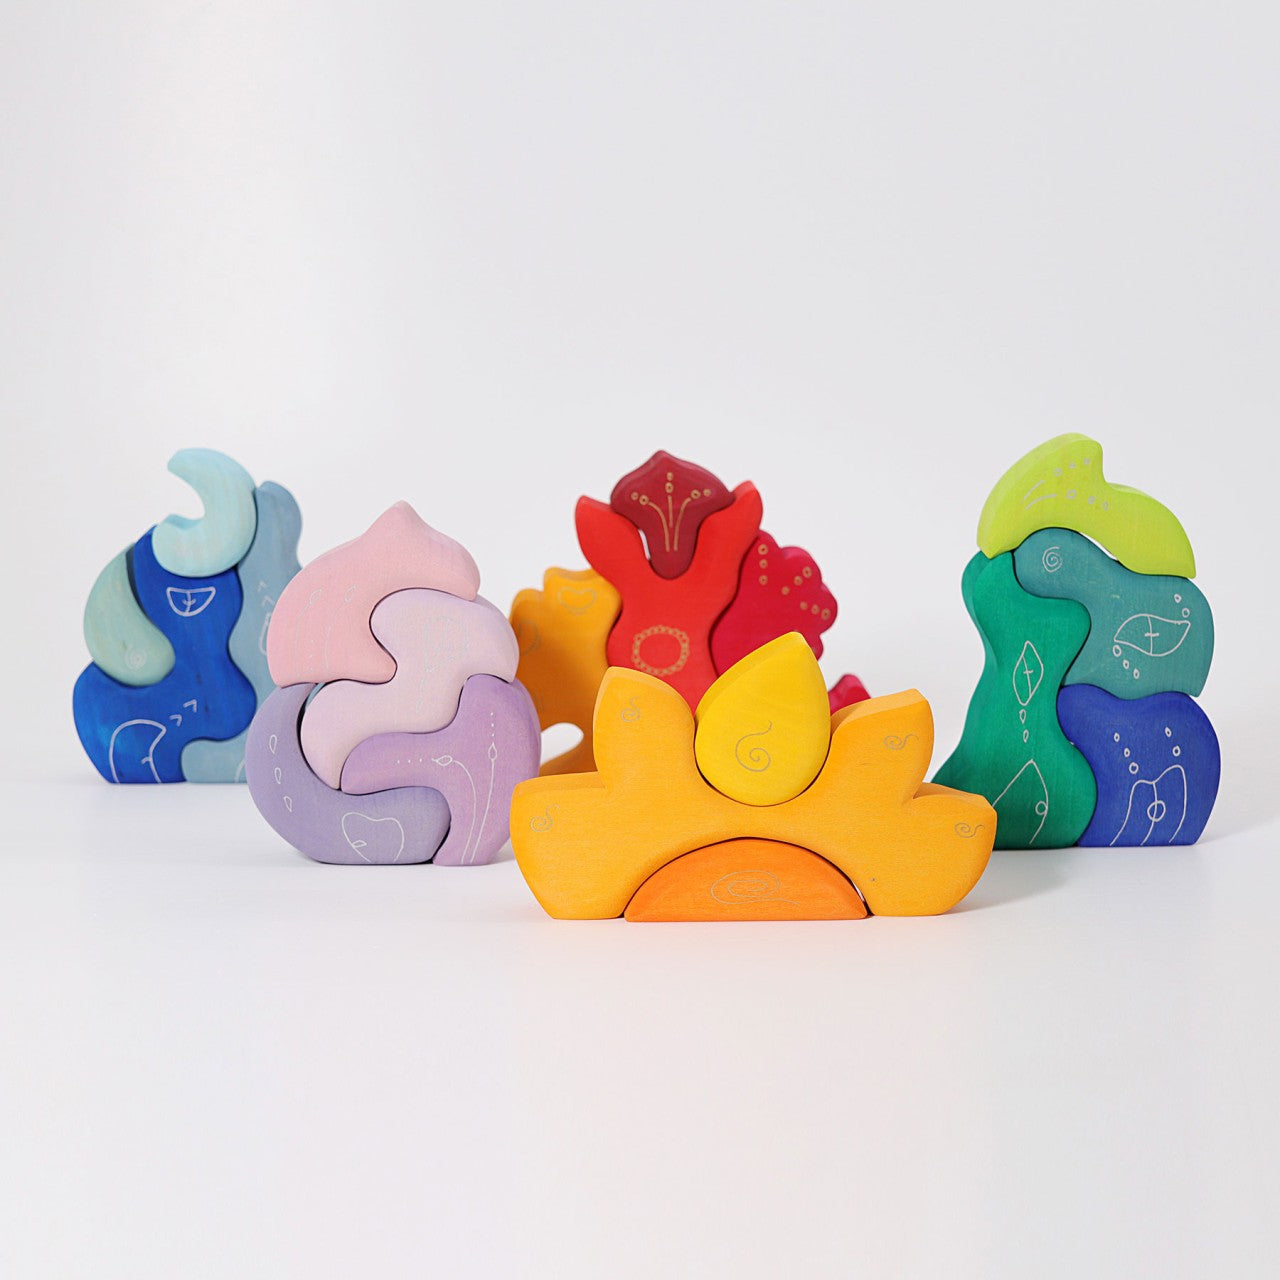 Casa Sole | 4 Pieces | Wooden Toys for Kids | Open-Ended Play